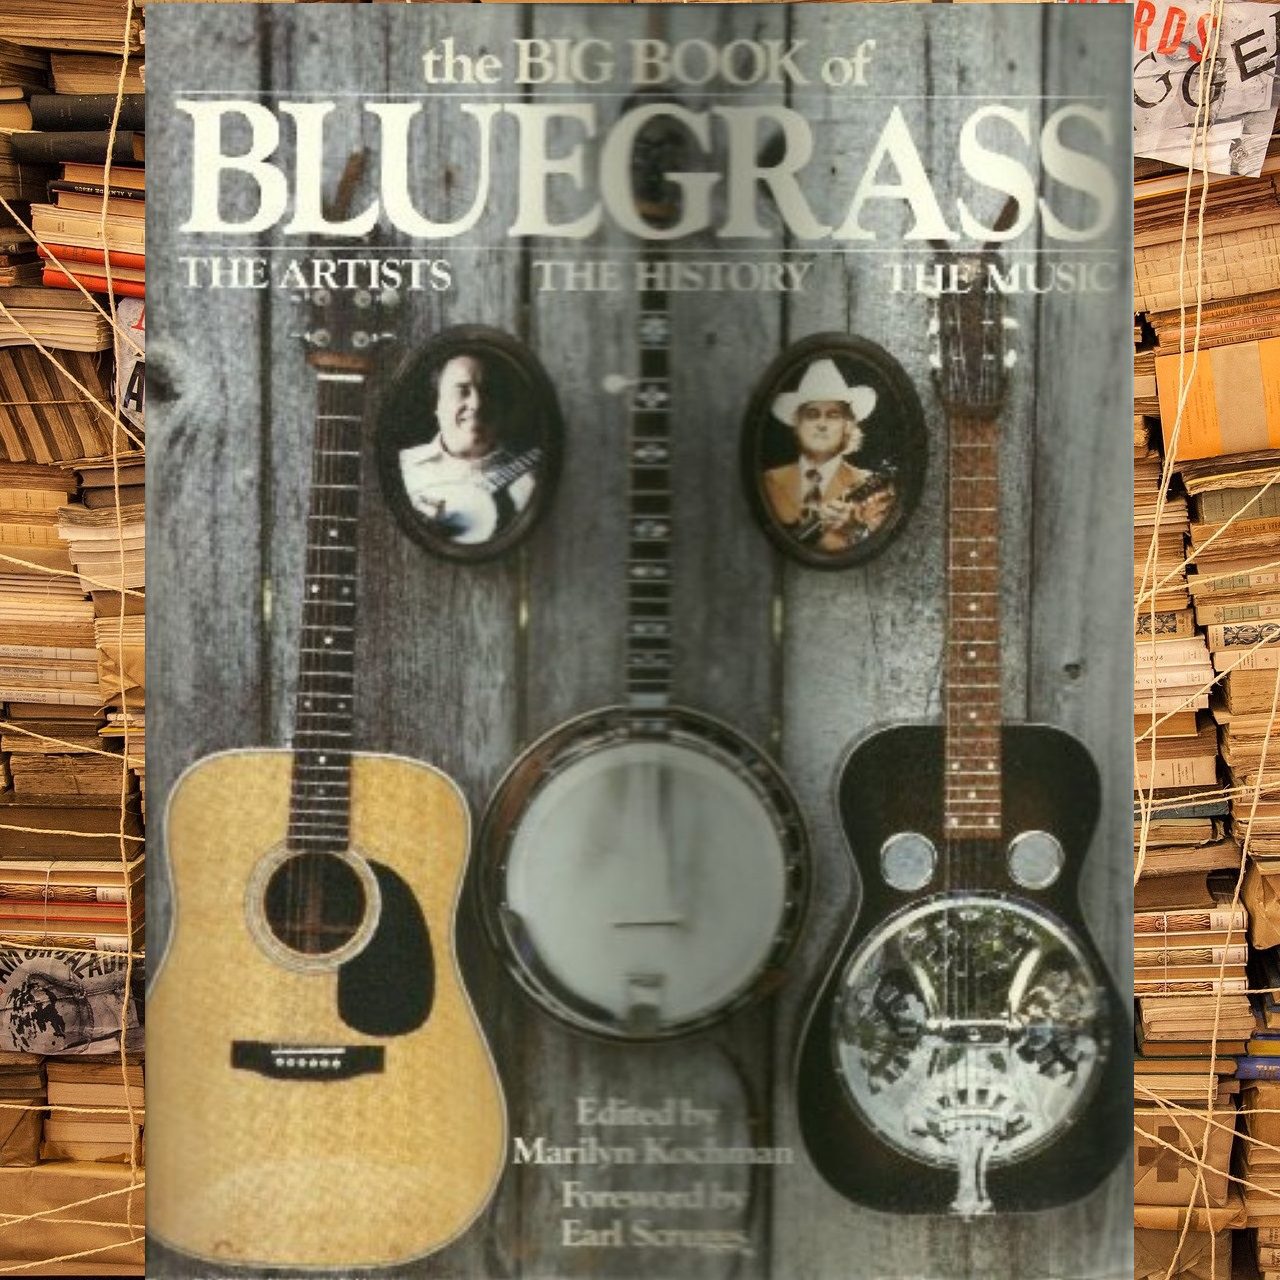 The Big Book Of Bluegrass – The Artists, The History, The Music